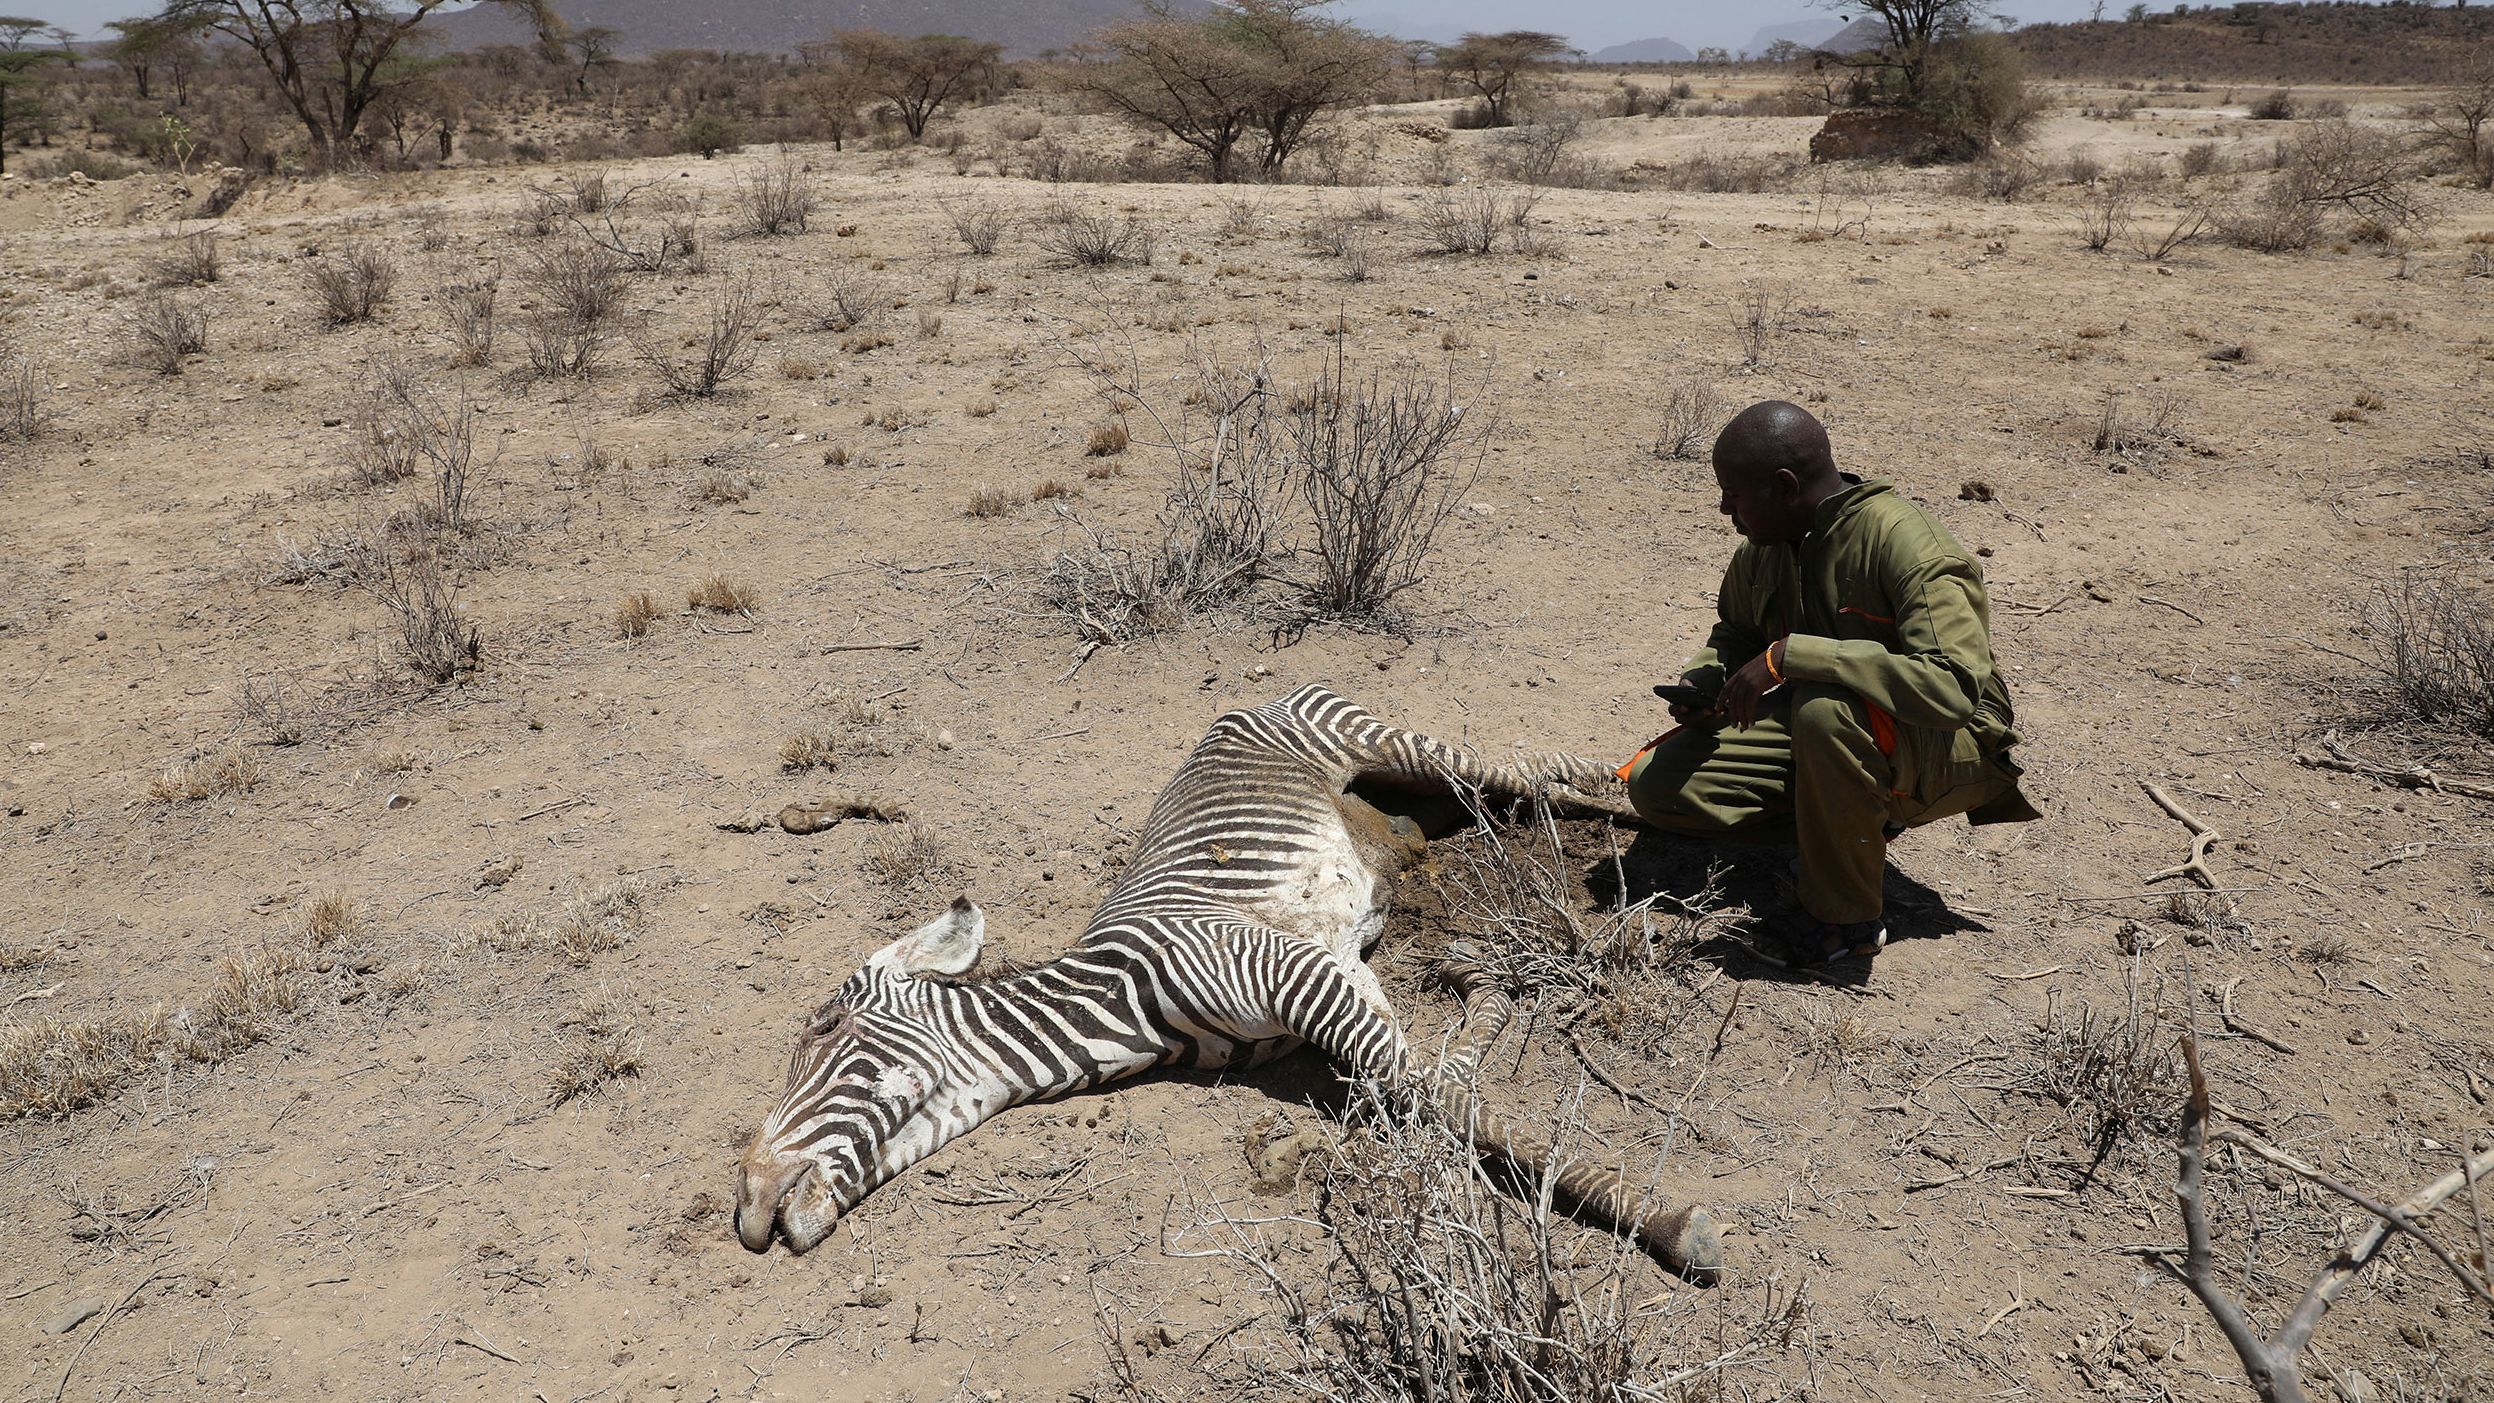 Andrew Letura, ecological and monitoring officer at the Grevy's Zebra Trust, kneels next to the carcass of an endangered Grevy's Zebra, which died during the drought, in the Samburu national park, Kenya, September 23, 2022.